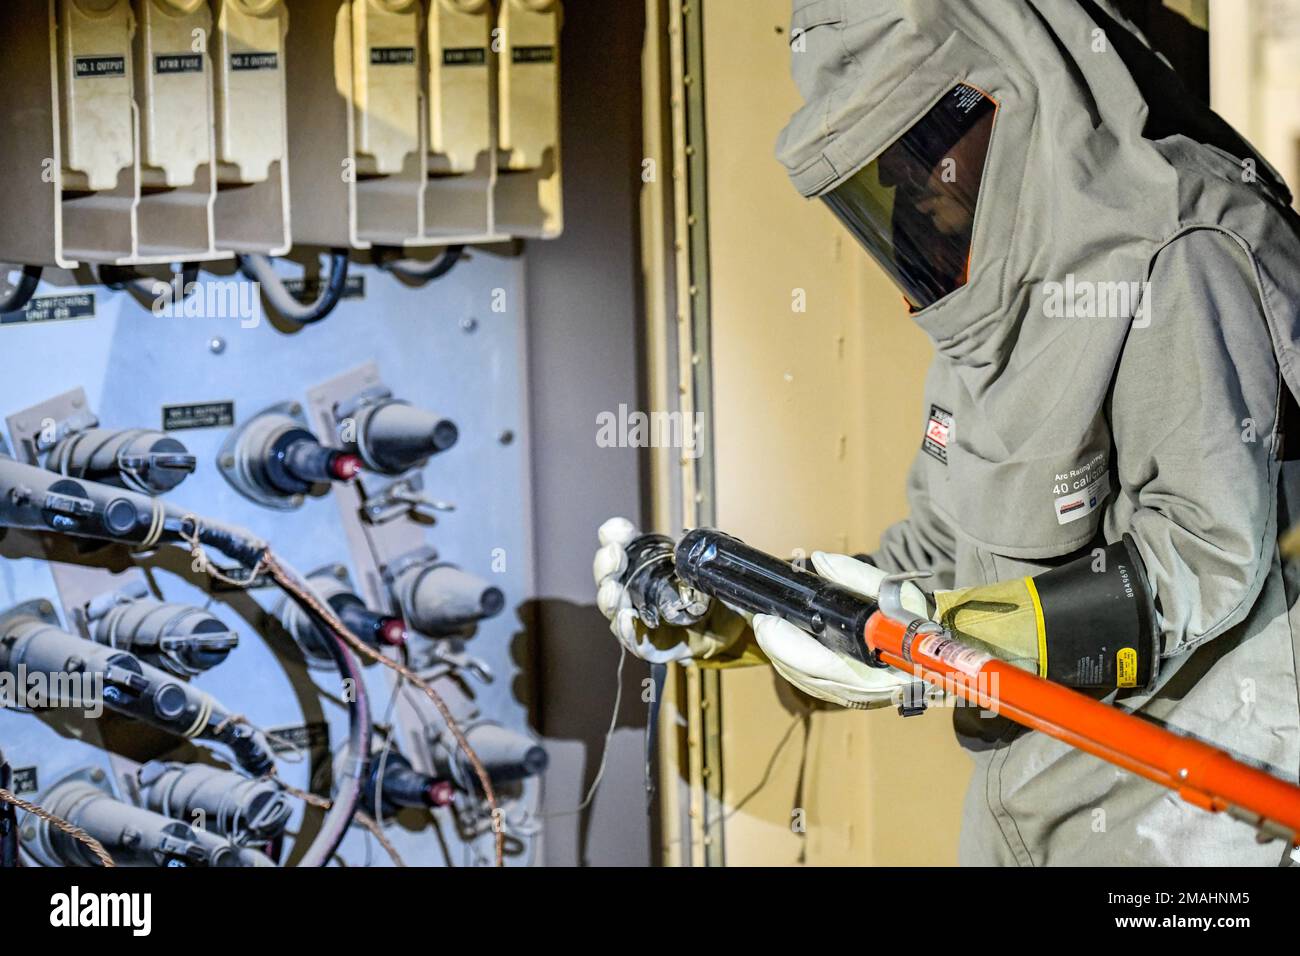 Electrical Arc Flash Suits Suppliers in Ahmedabad, Gujarat, India